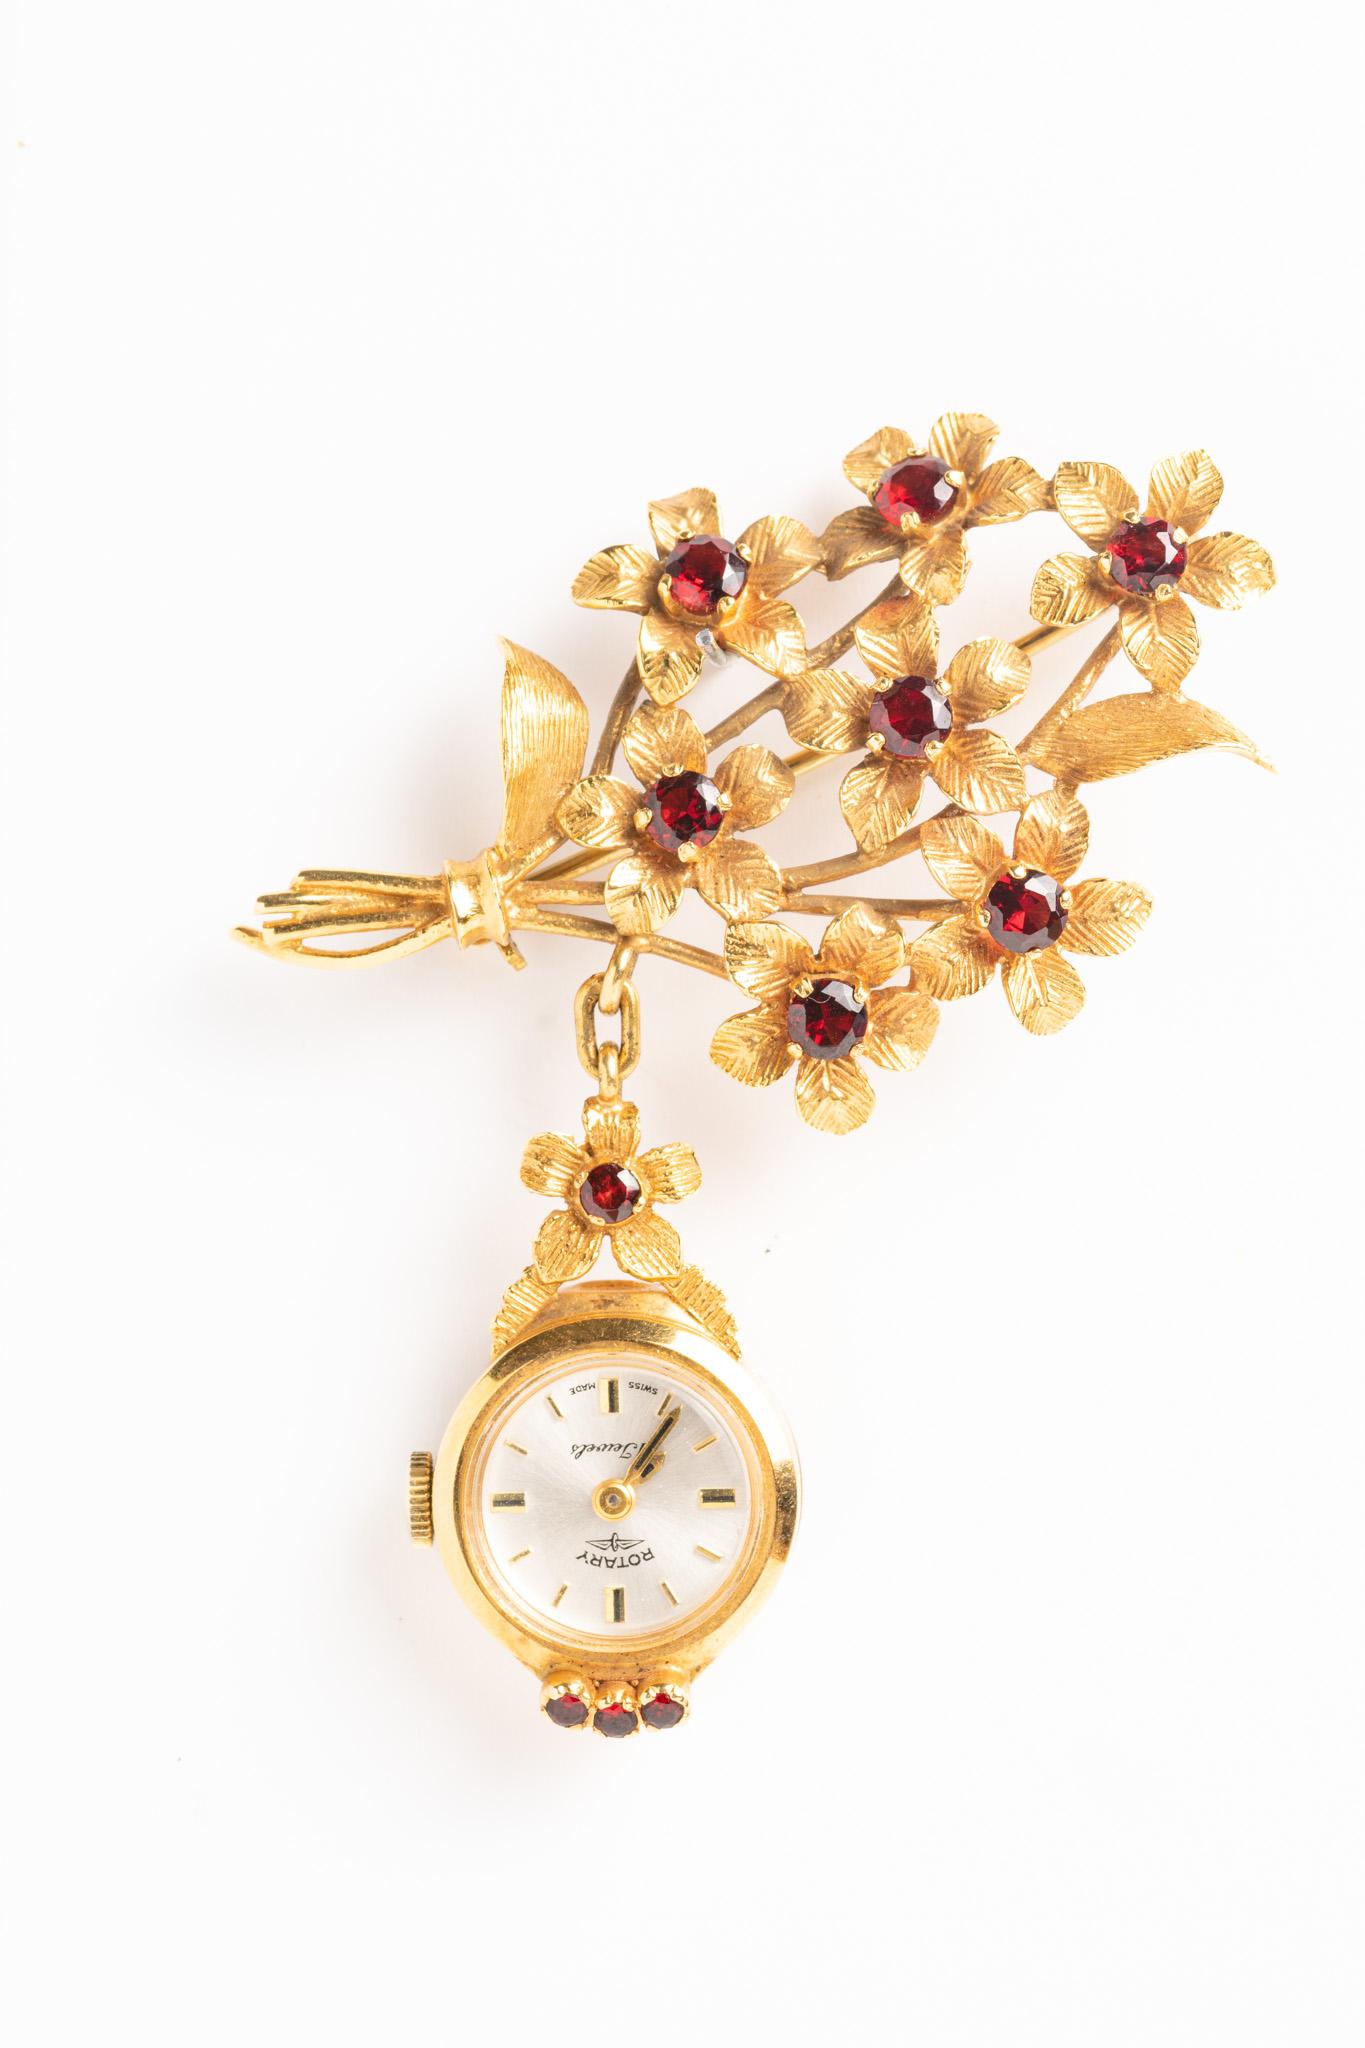 Beautiful and unique vintage Rotary 9ct Gold Watch Floral Brooch. The watch is made circa 1968 by an award-winning worldwide brand of classic timepieces. This Rotary watch brooch has manual wind 21 jewelled Swiss movement. The face is oval with a